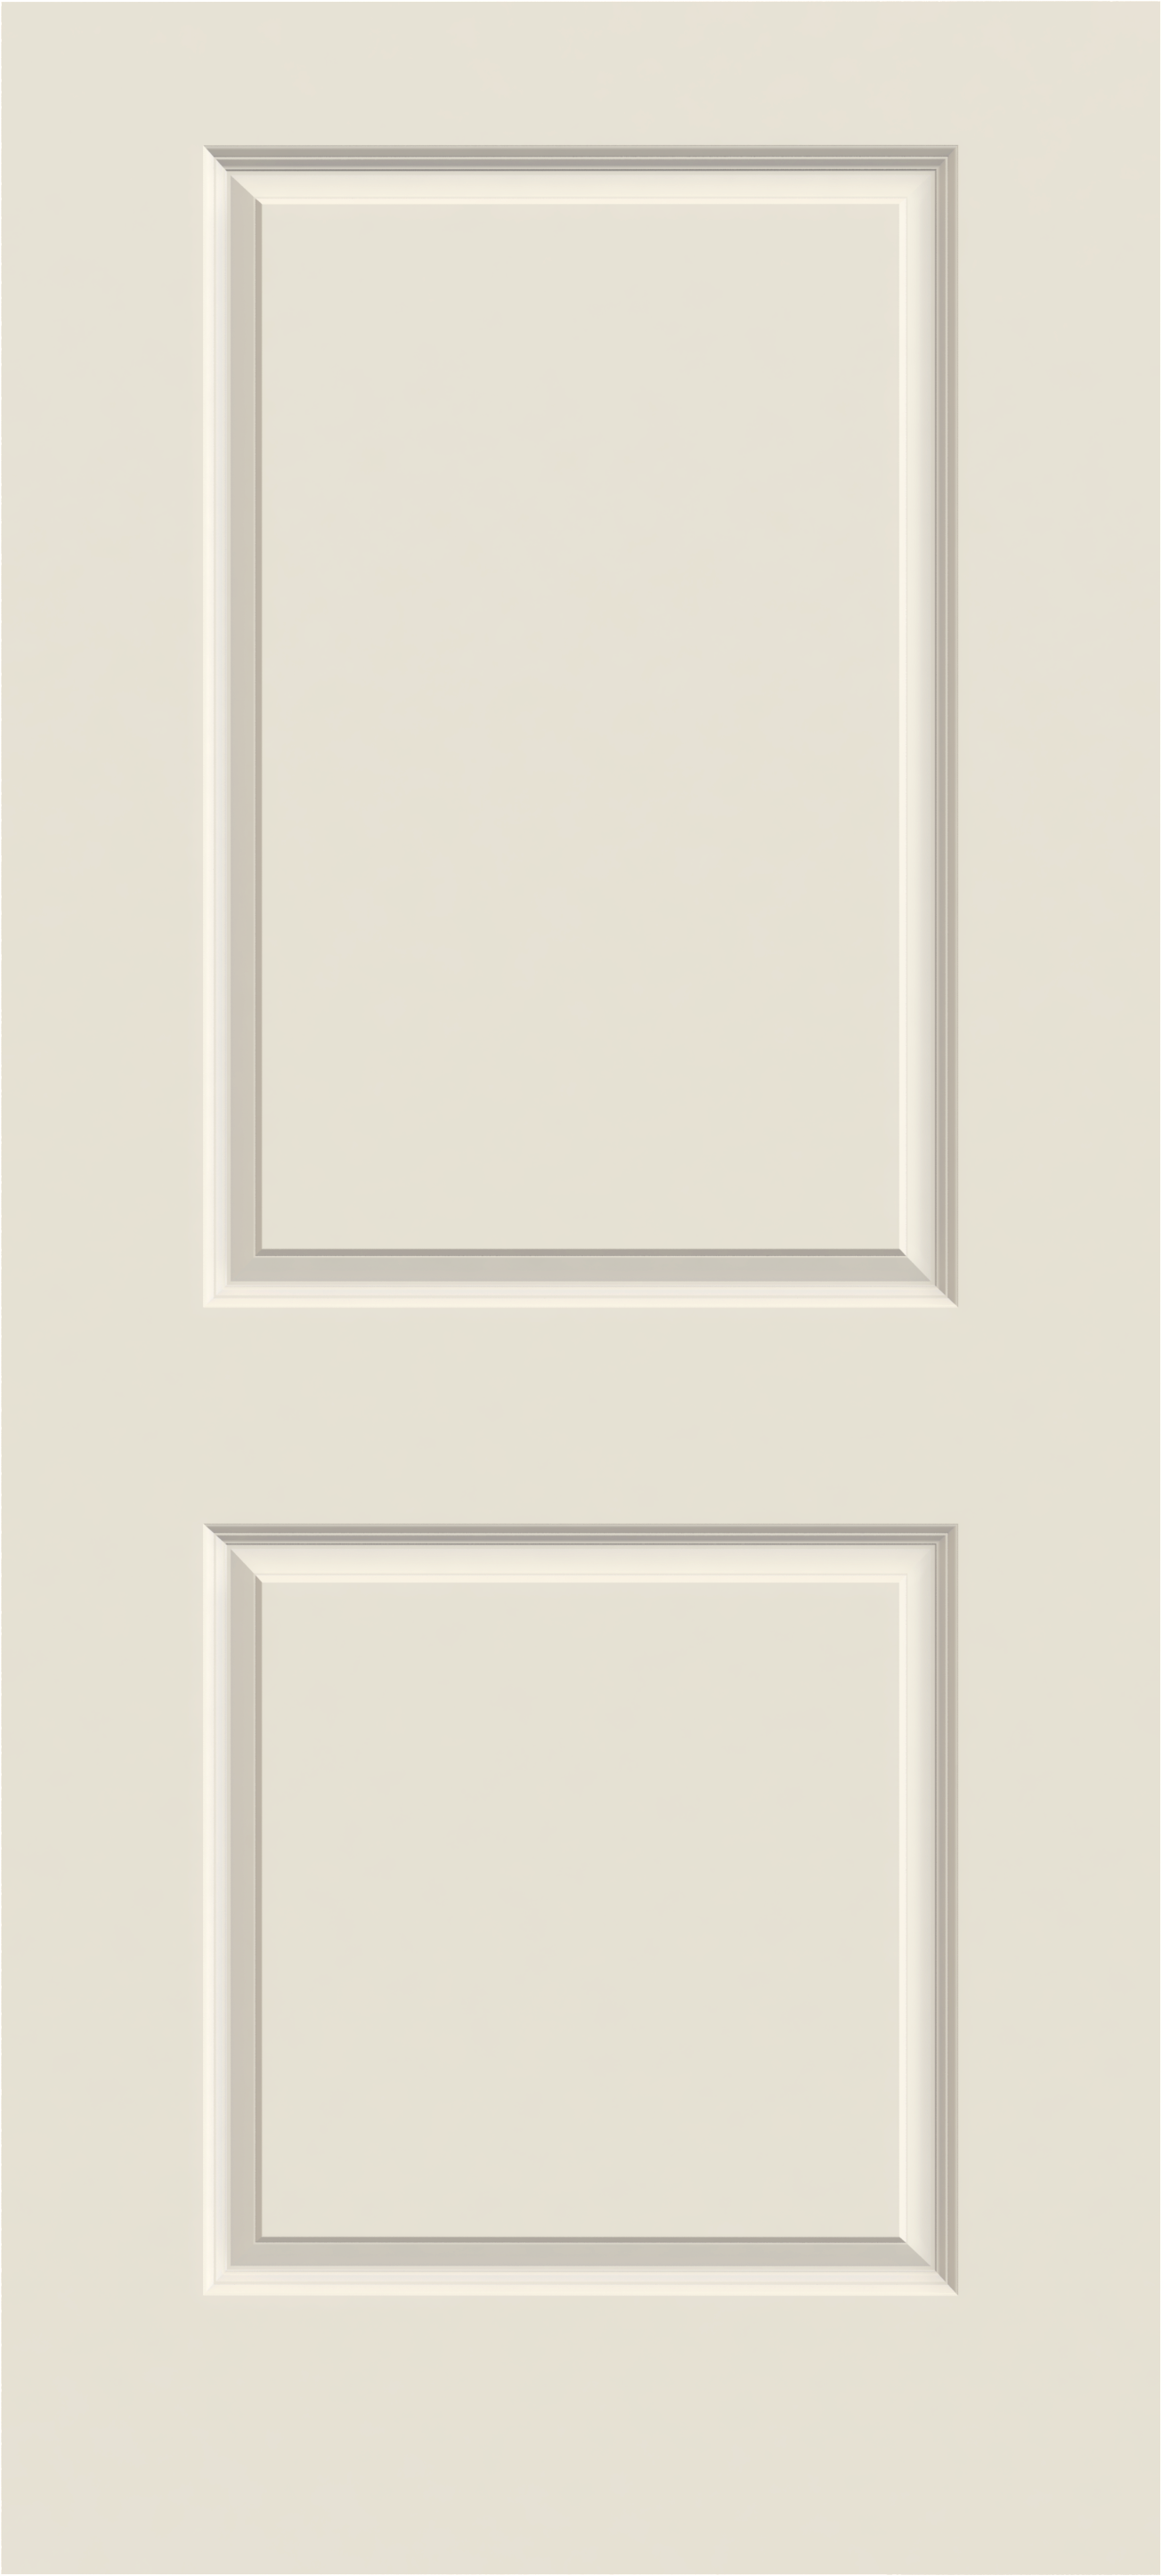 Raised-panel door for home’s interior consists of two large, squared panels and a smooth surface